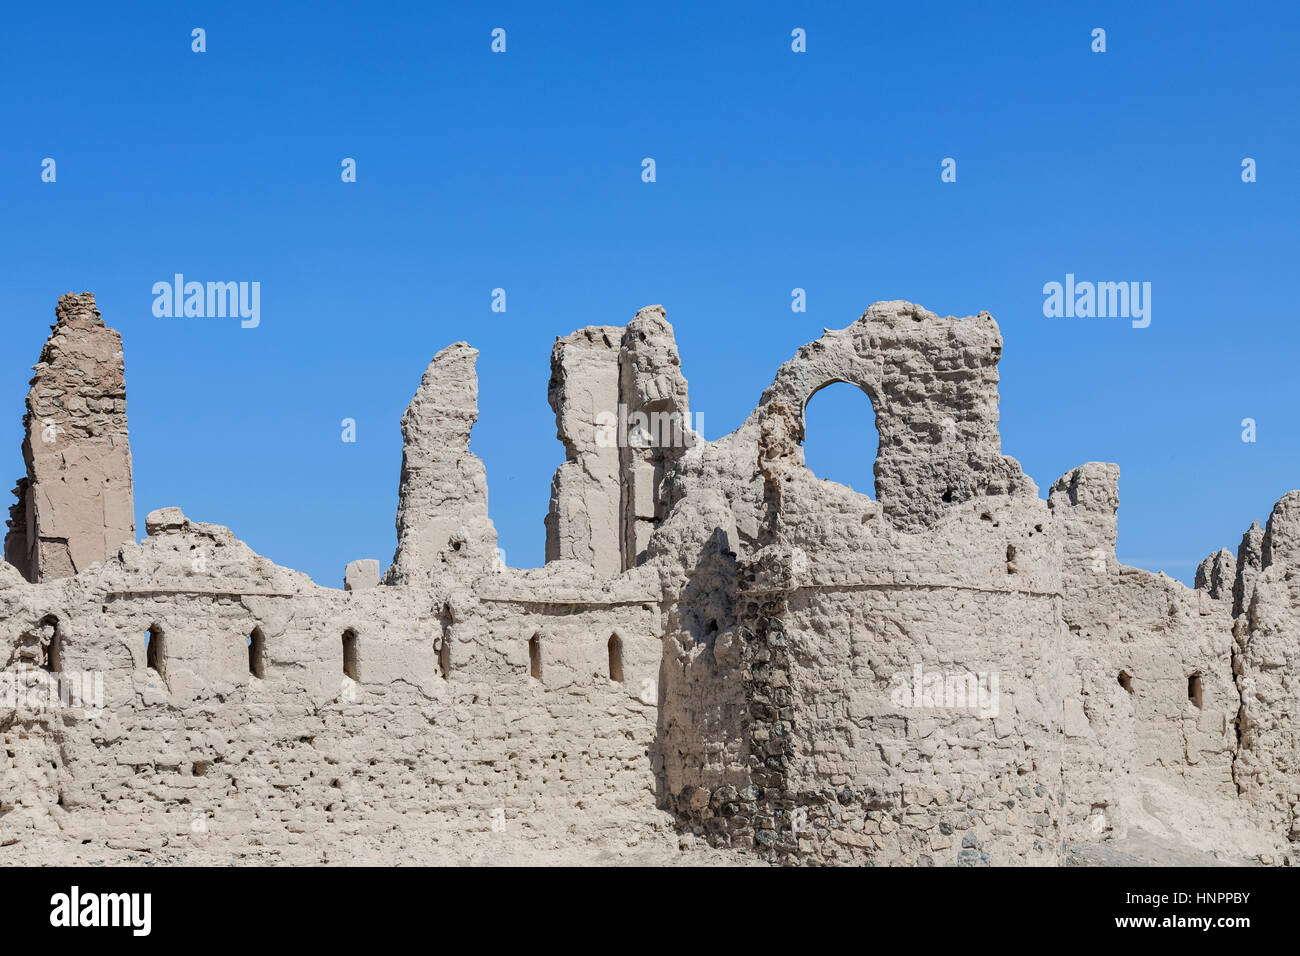 abandoned village in Ibra, Oman, Middle East, Asia Stock Photo